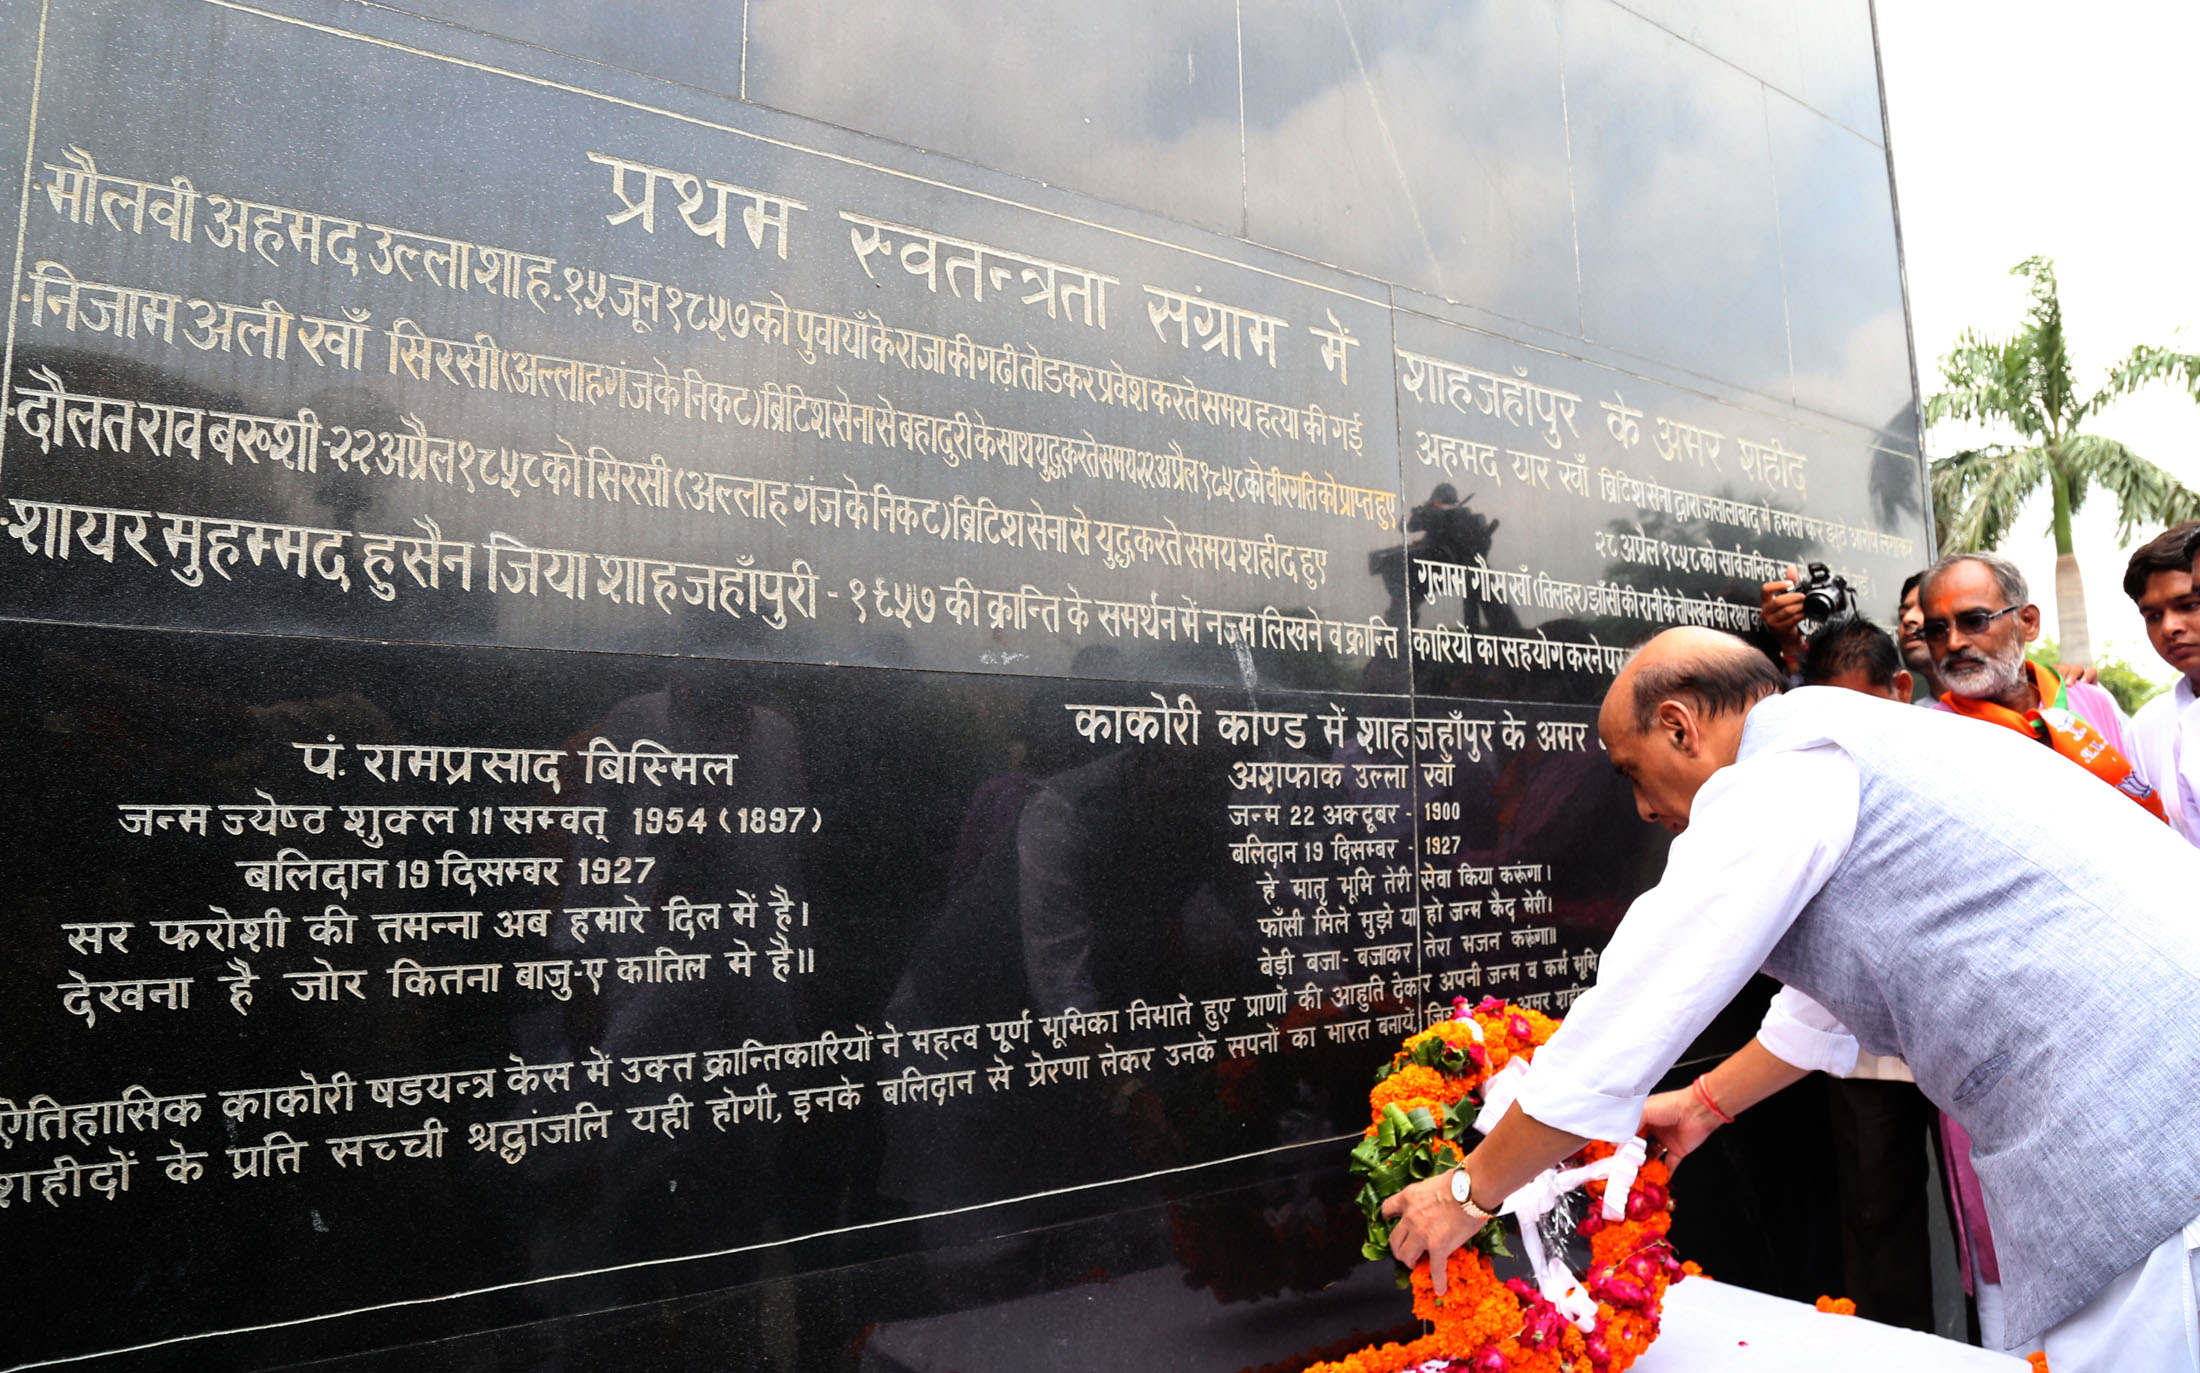 The Union Home Minister, Shri Rajnath Singh paying tributes at the Freedom fighters Martyrs memorial at Shahjahanpur, in Uttar Pradesh on August 20, 2016.